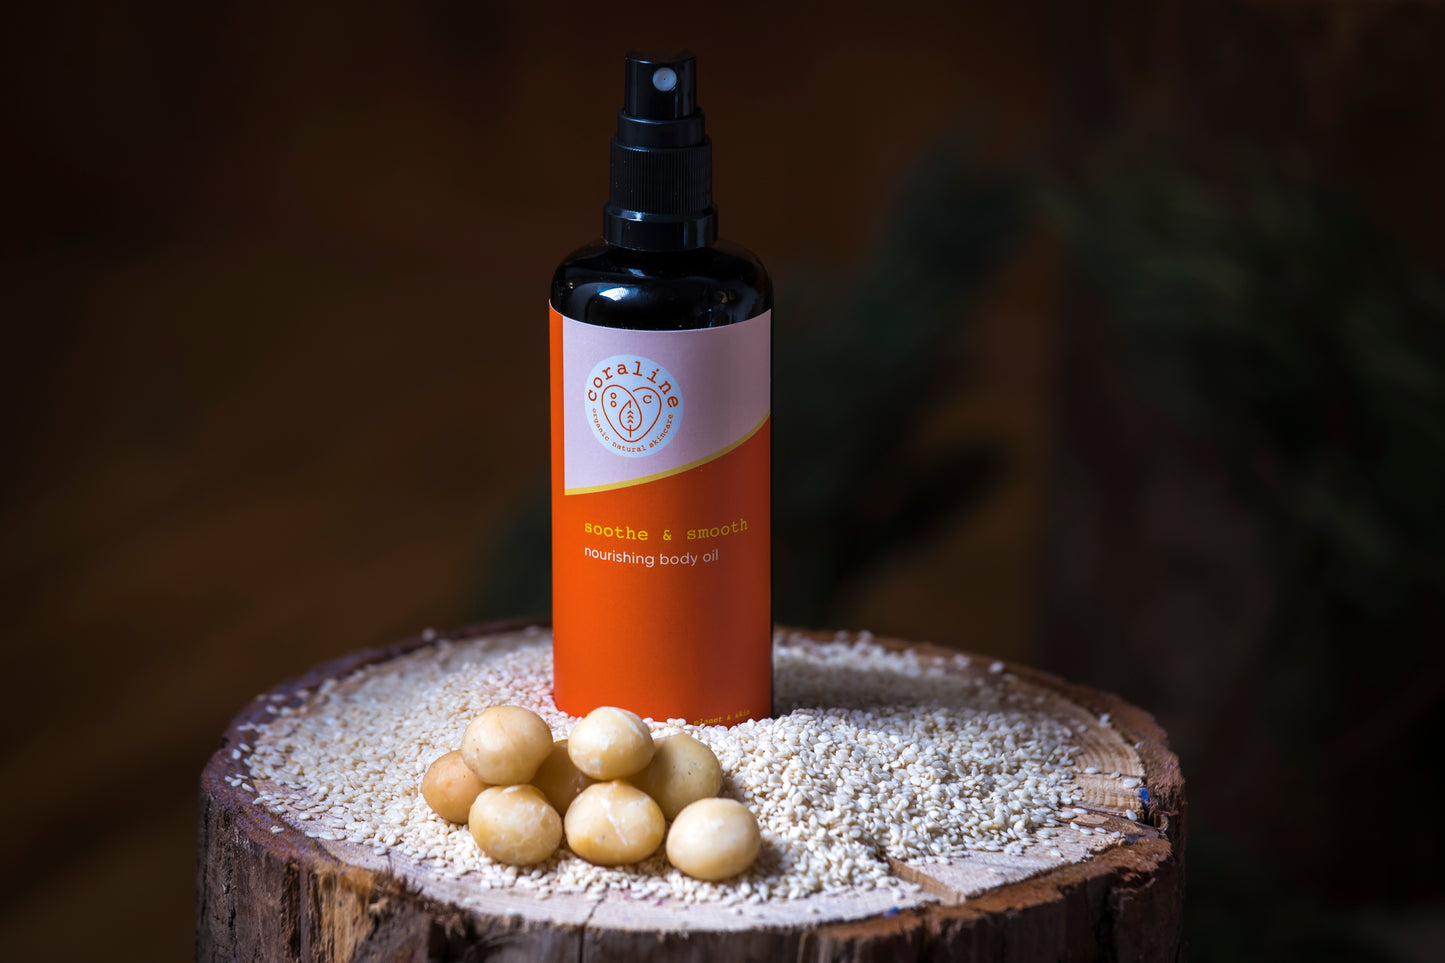 A black bottle of smooth and soothe nourishing body oil, with an orange label, sits on a wooden surface scattered with small, cream-coloured macadamia nuts and grains. The background is softly blurred, giving a warm, earthy ambiance.